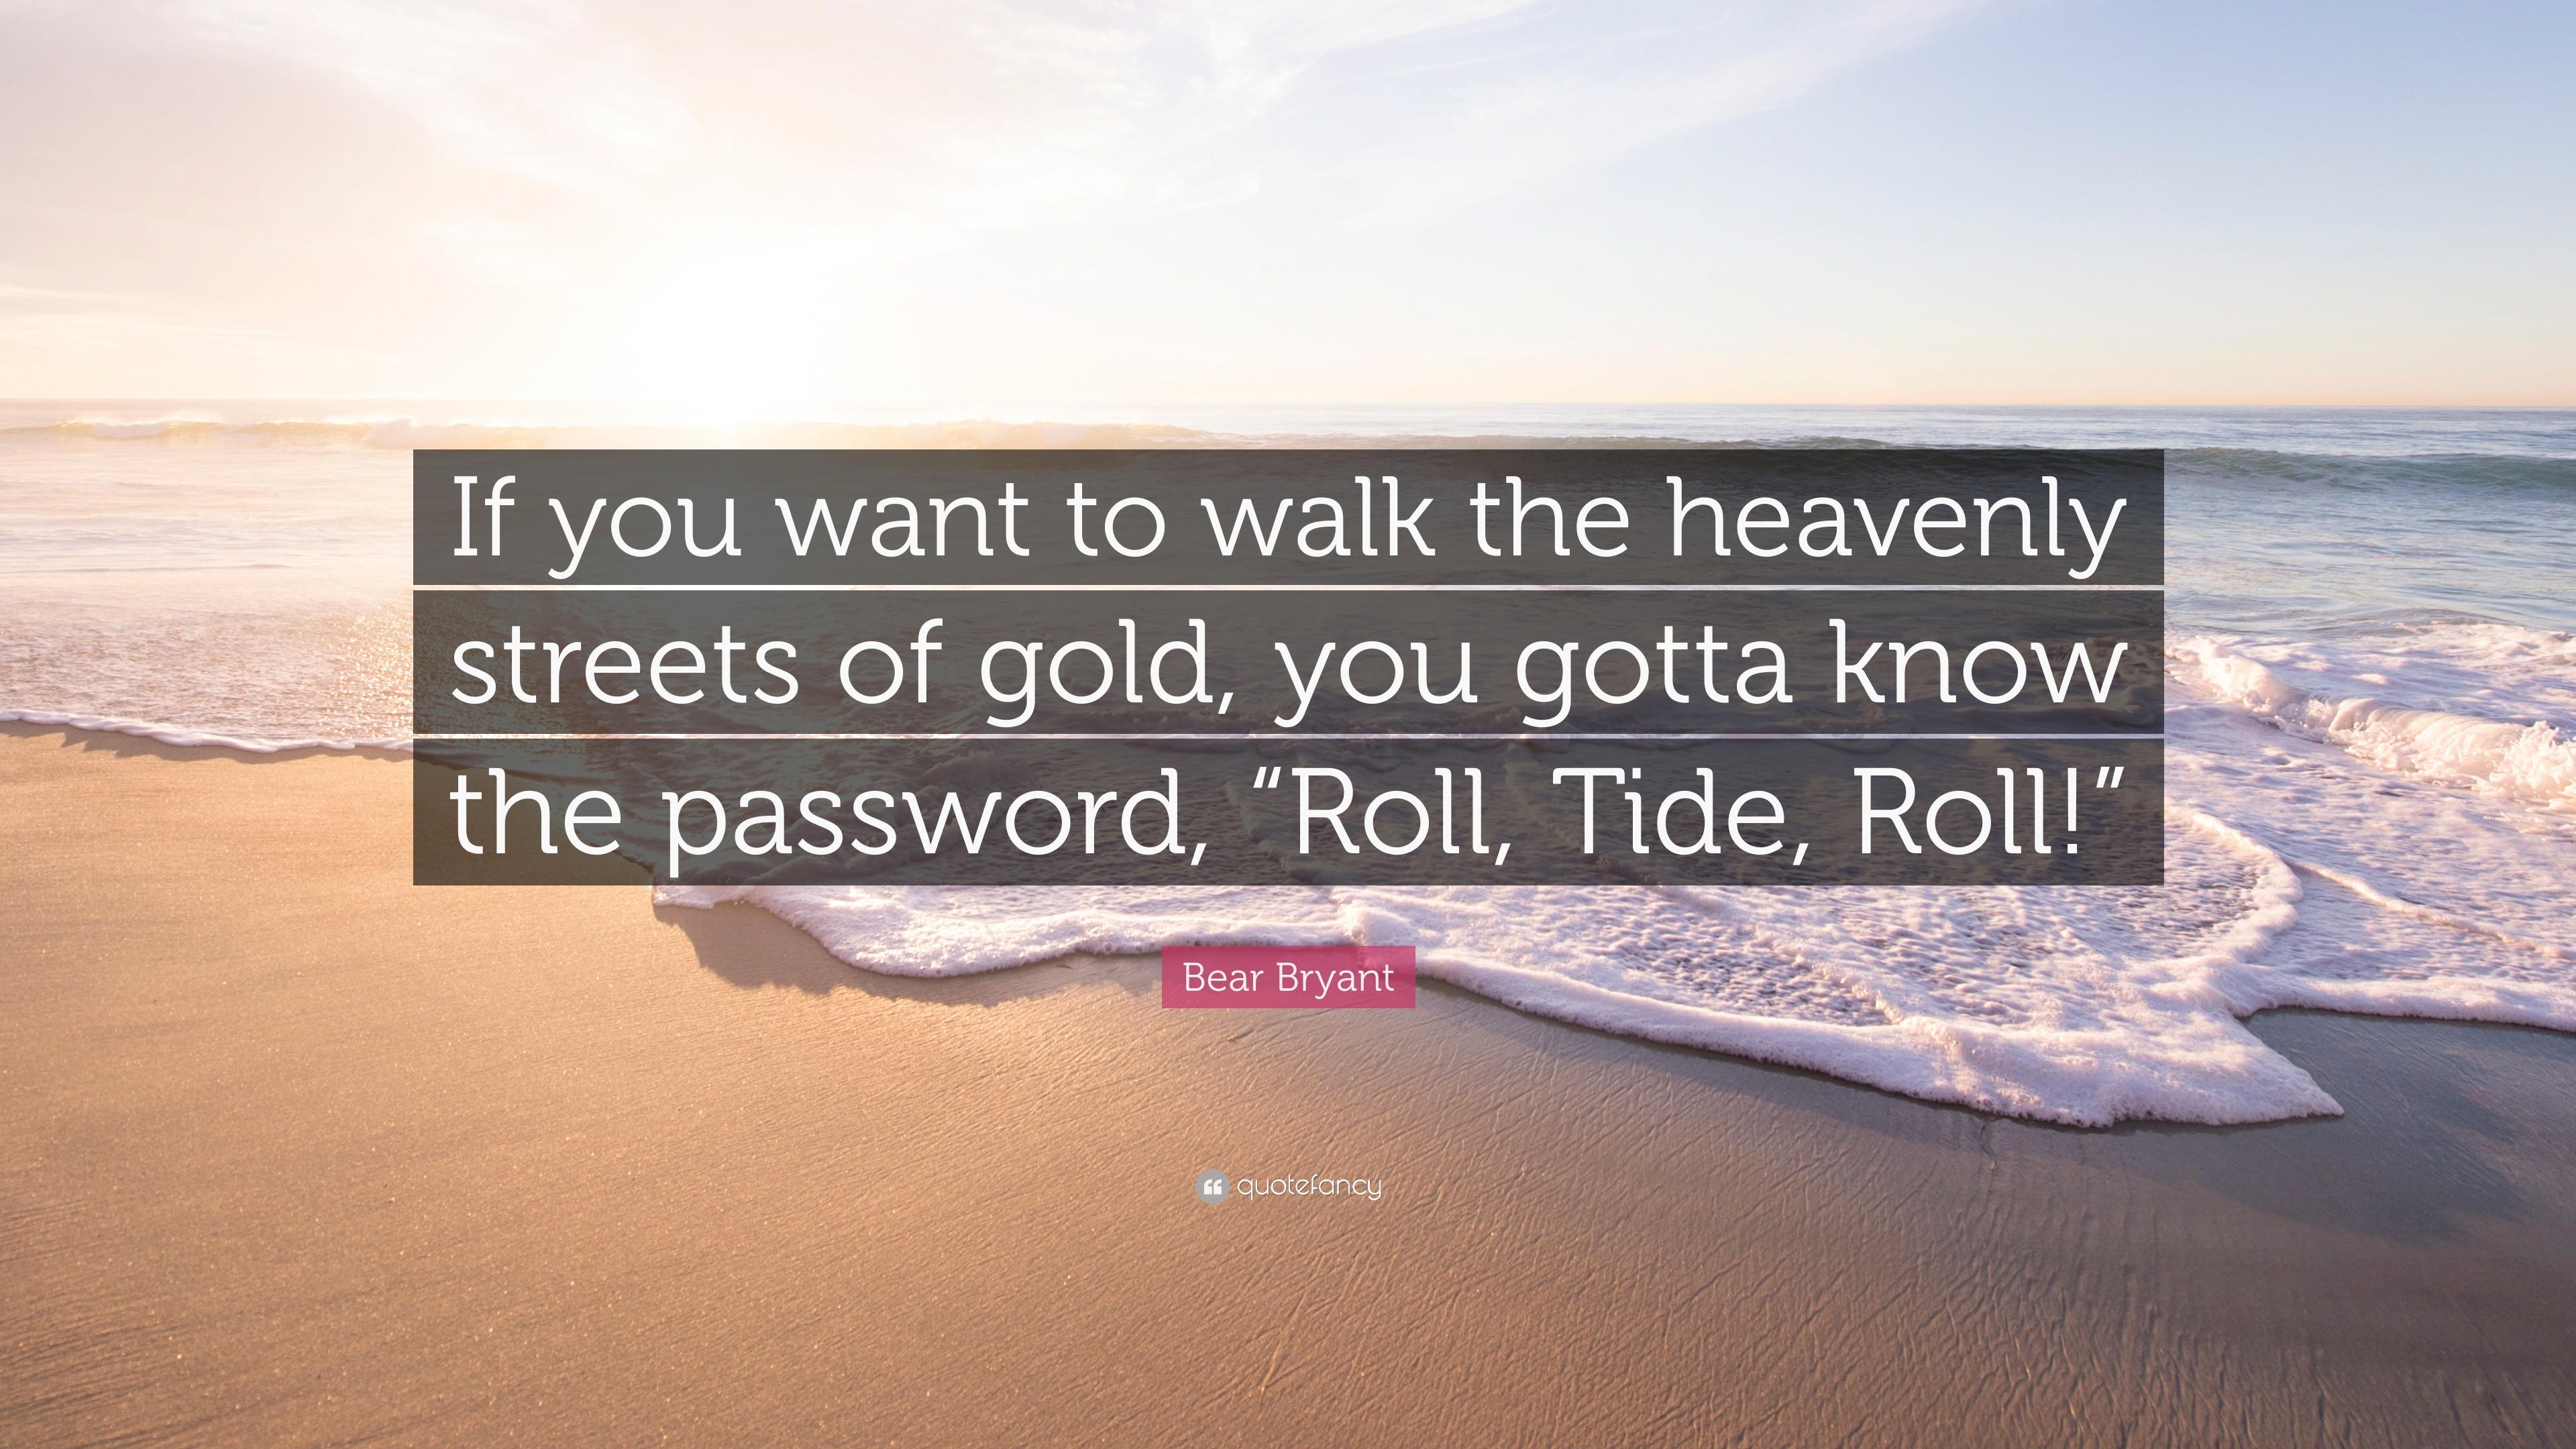 3840x2160 Bear Bryant Quote: "If you want to walk the heavenly streets...